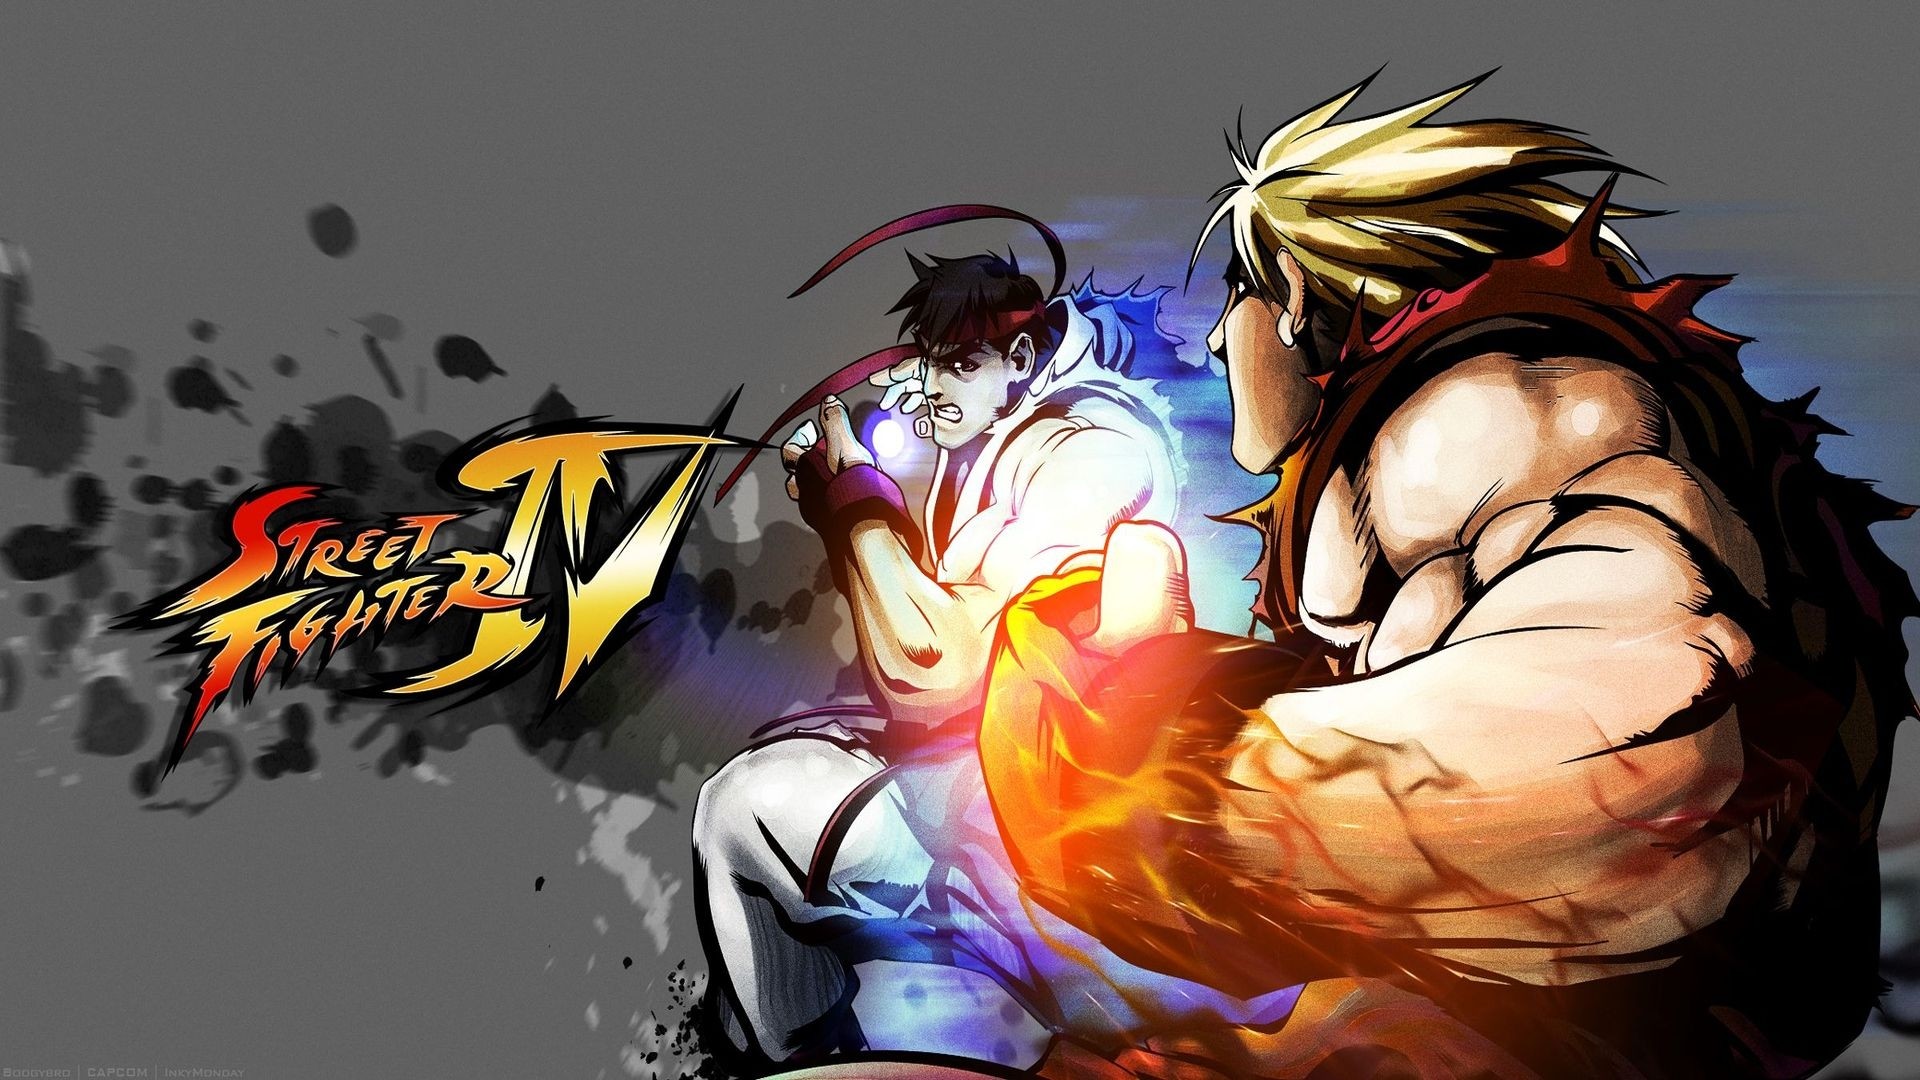 1920x1080 Street Fighter IV Game